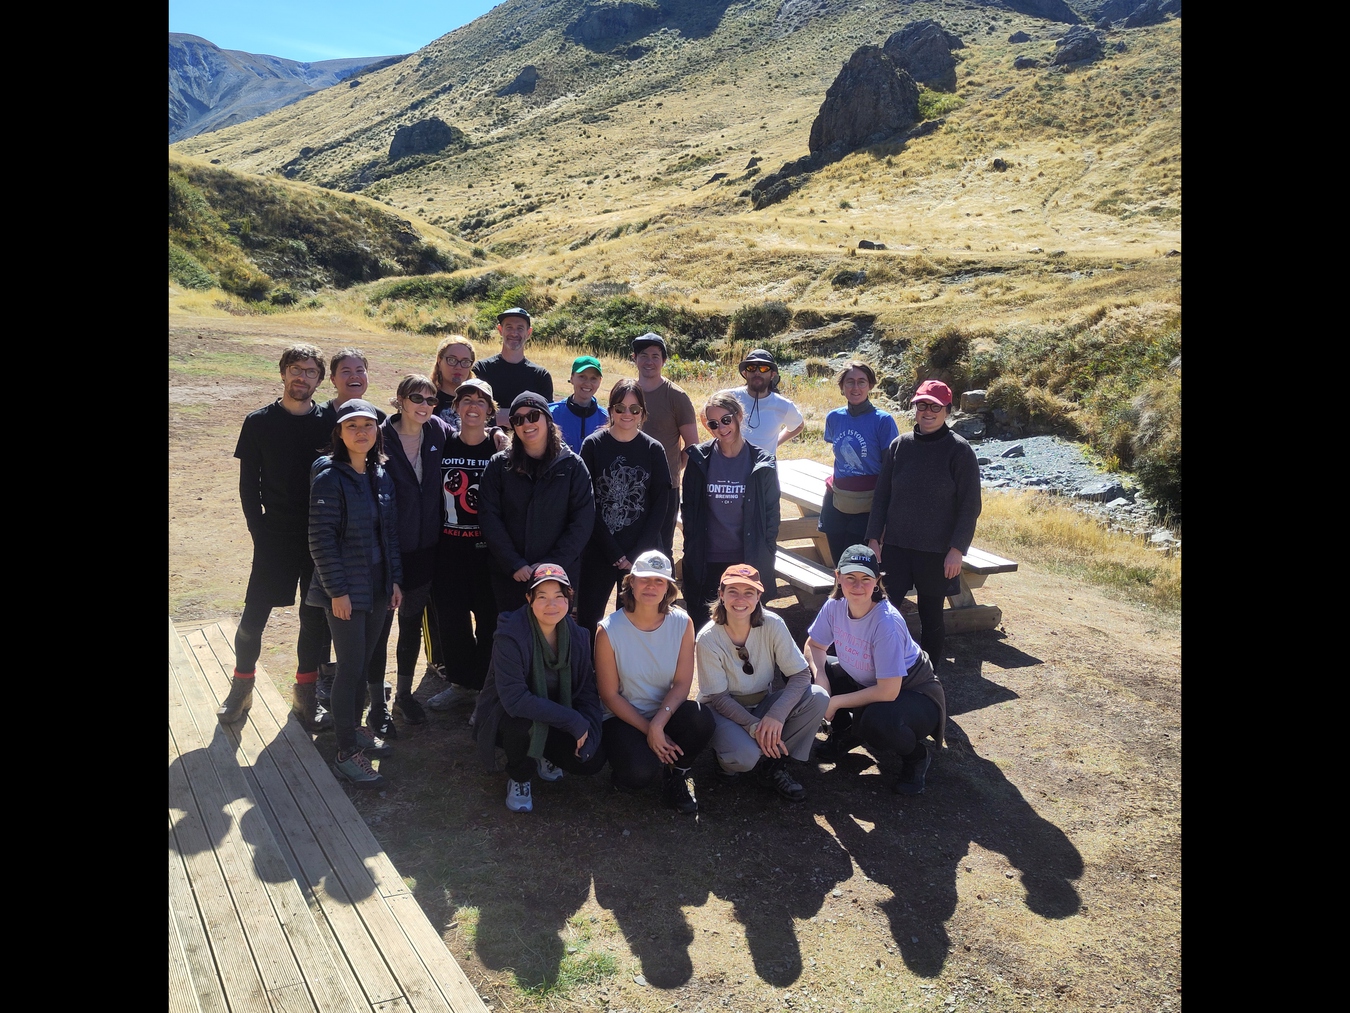 A group photo is taken outside the hut before we leave on the second day. The sky is blue and a rocky peak can be seen high behind us